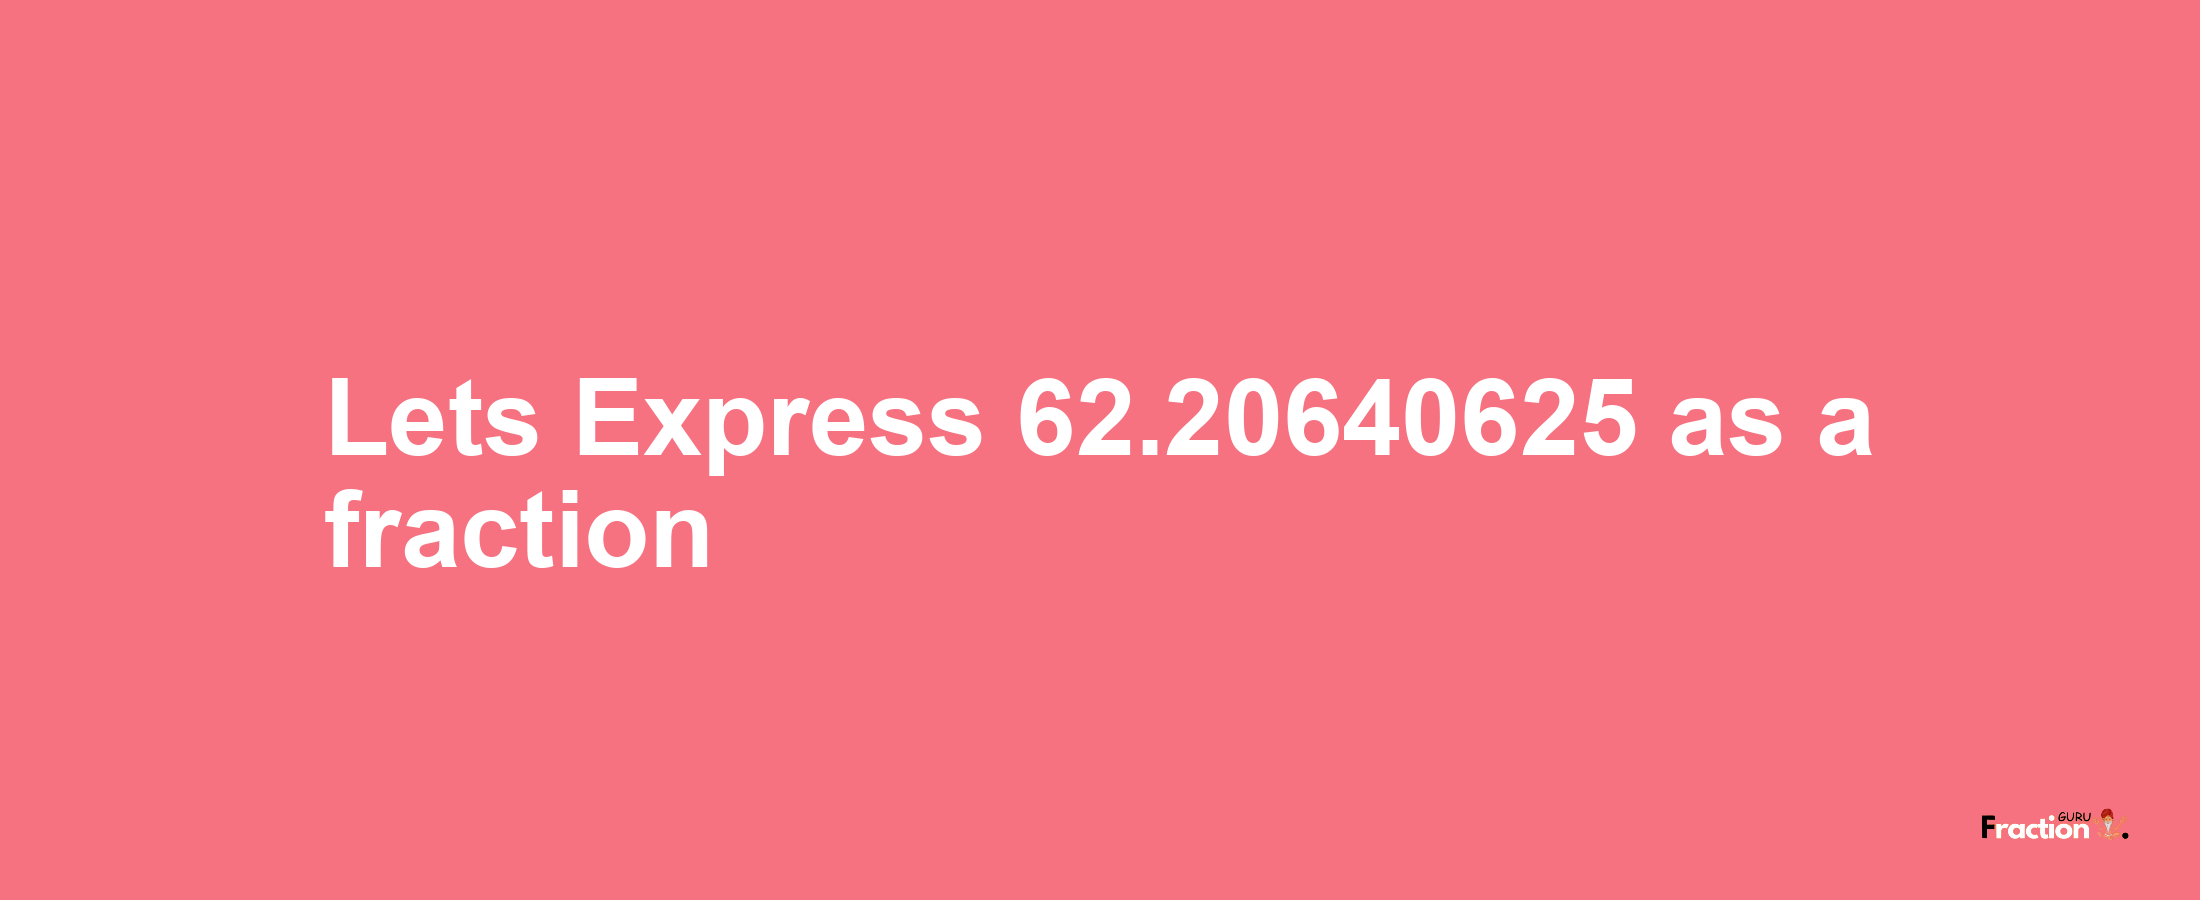 Lets Express 62.20640625 as afraction